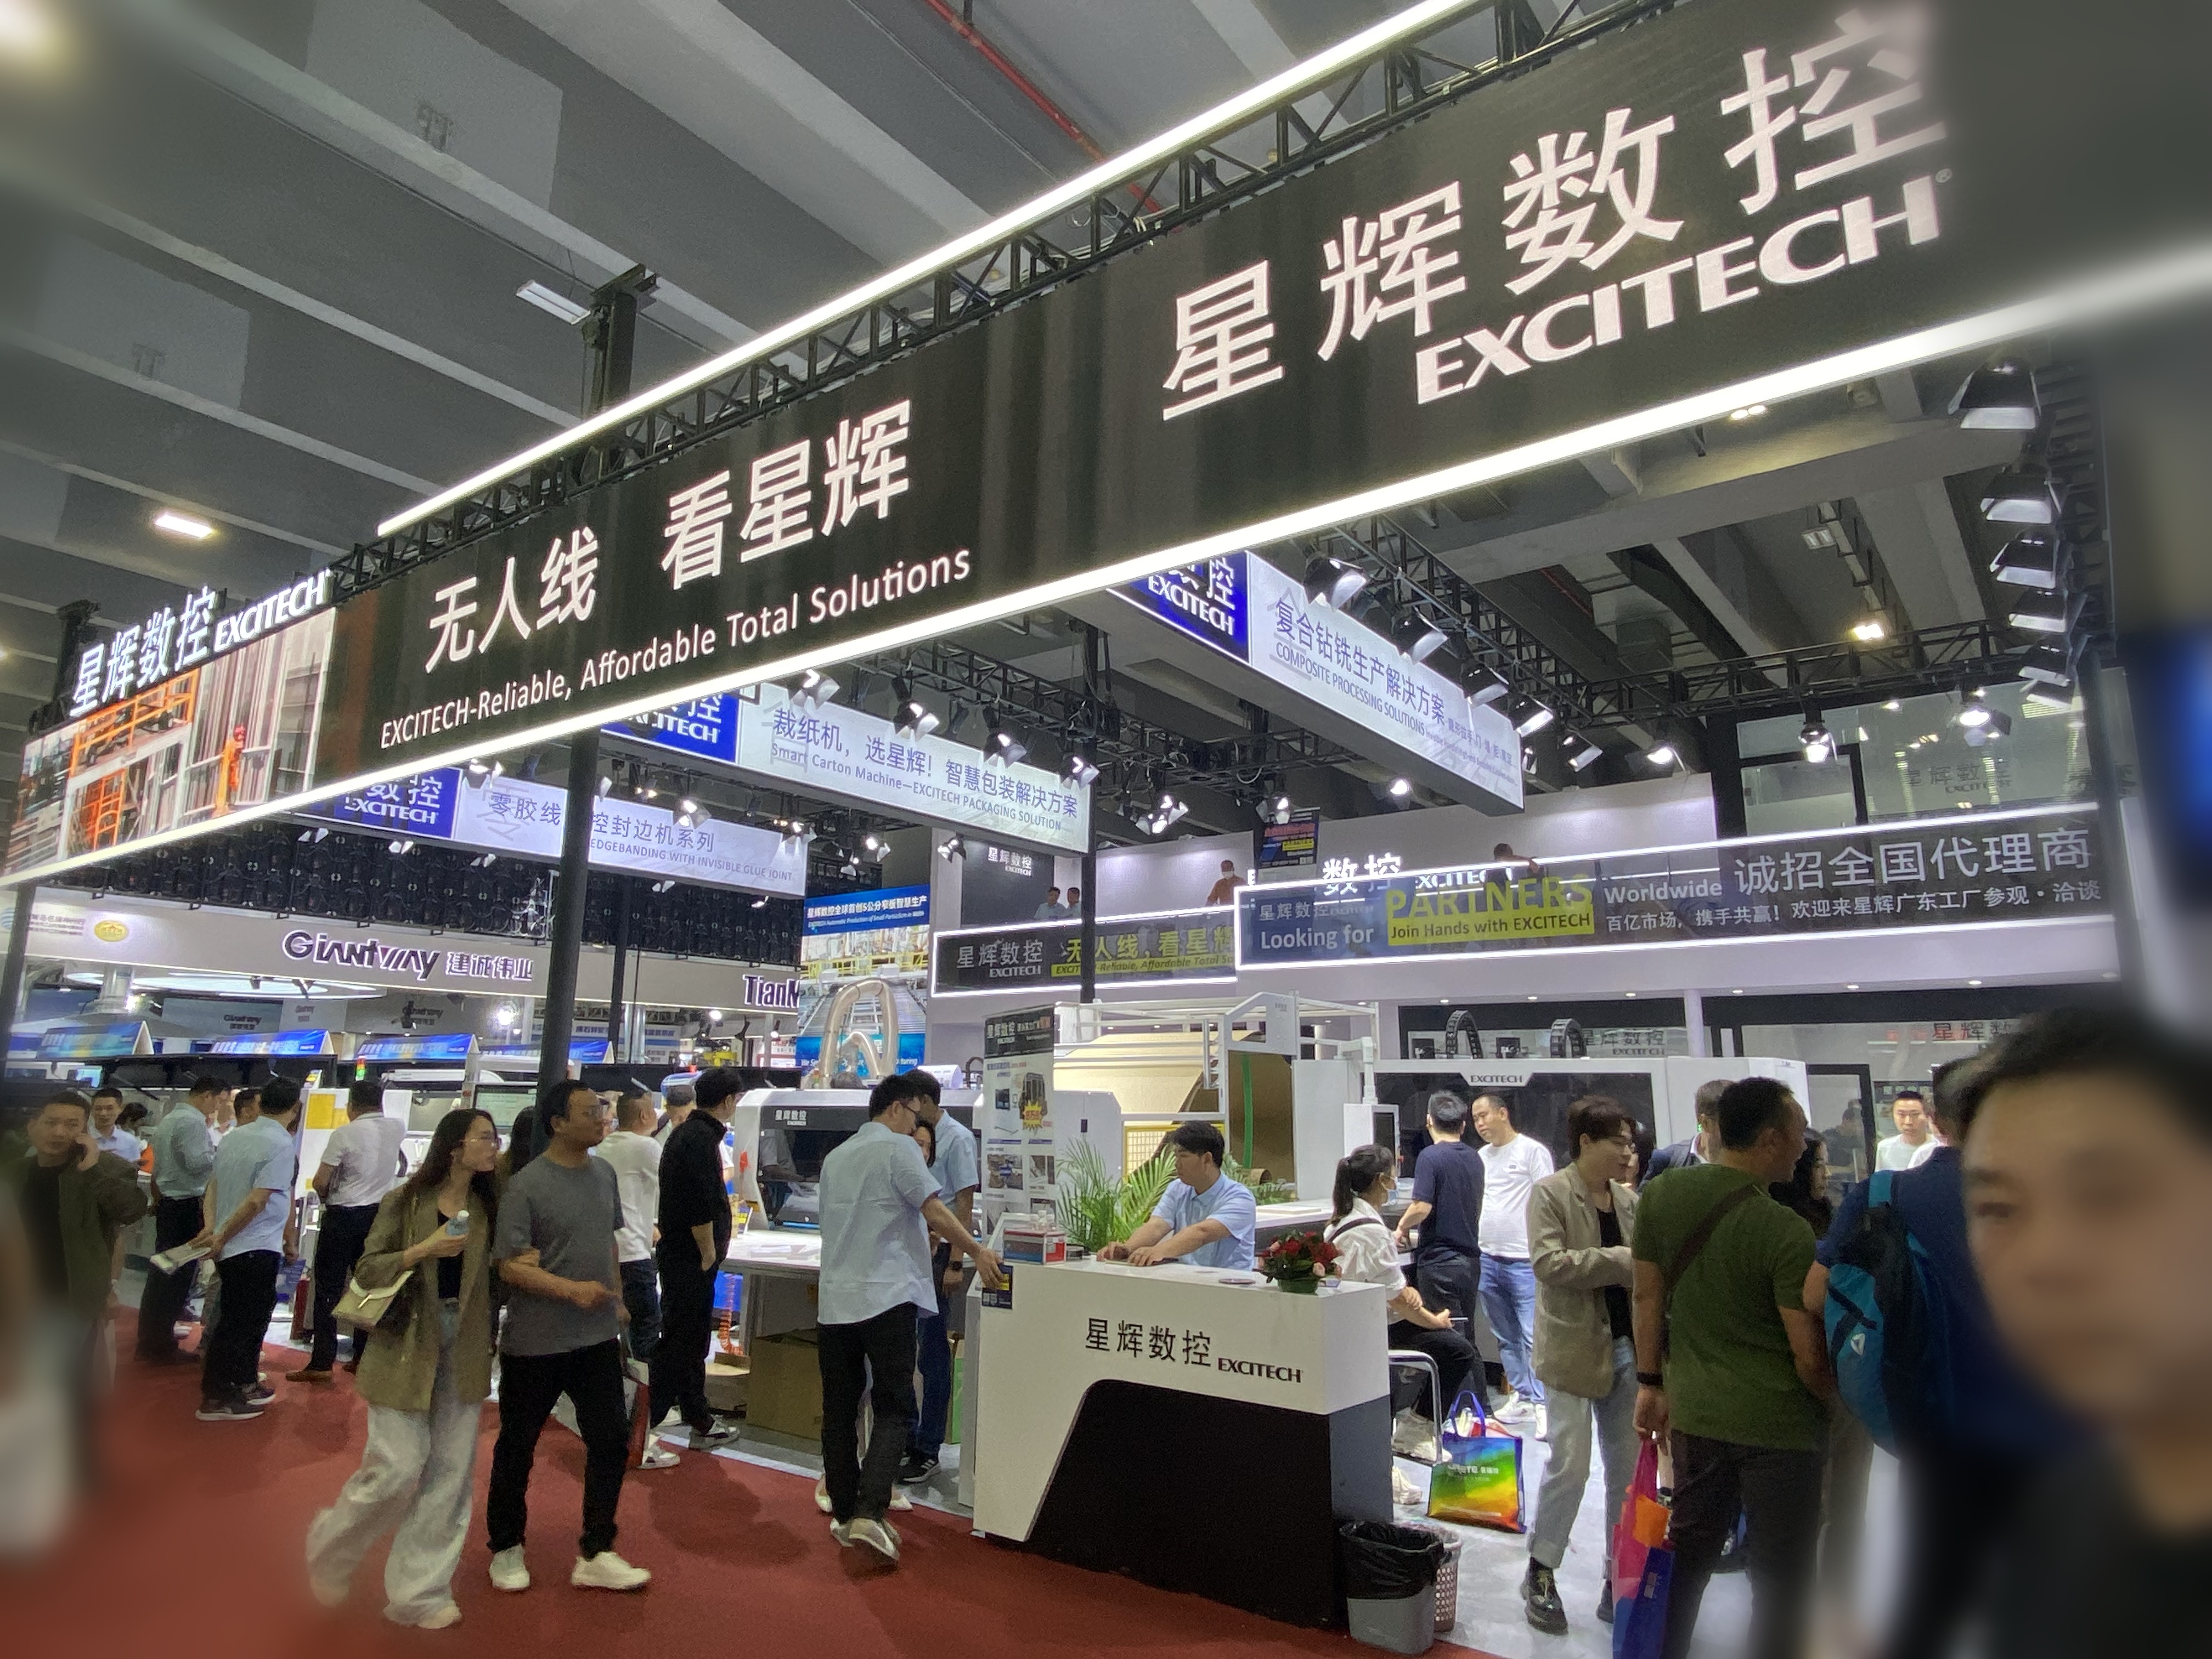 Come to the exhibition site to experience the Excitech woodworking machine.